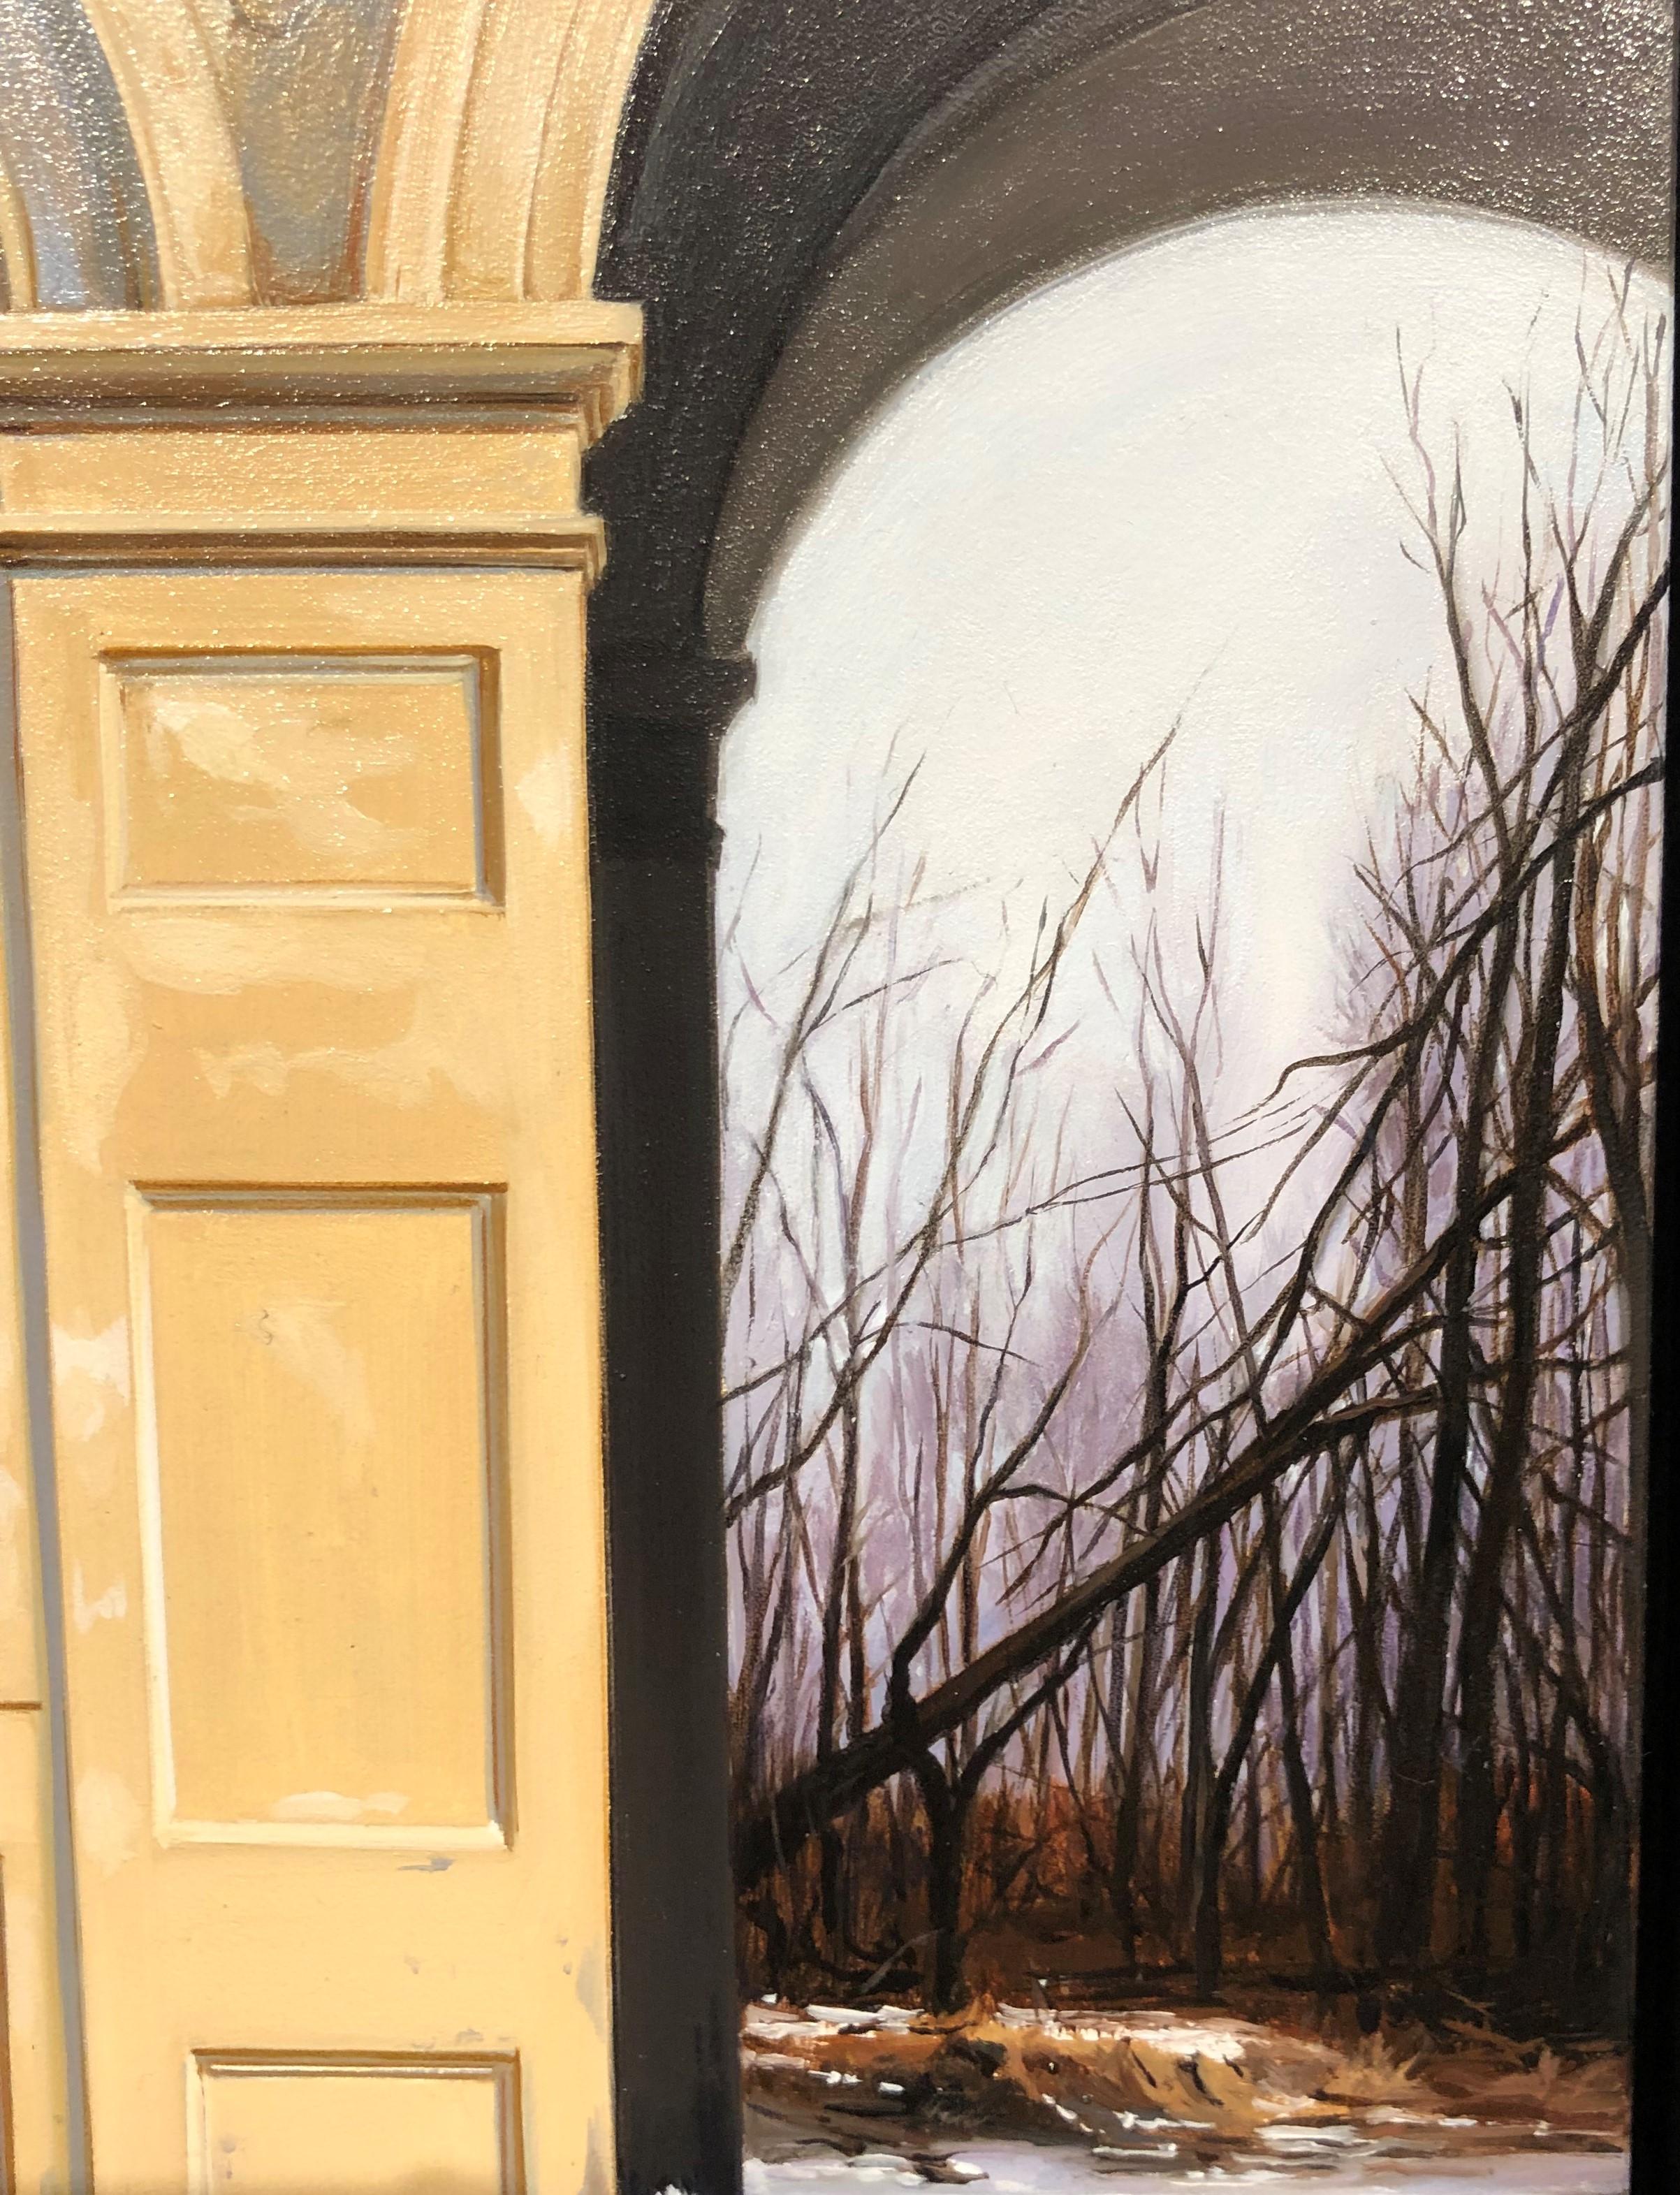 Medici Winter - Classic Architecture Facade with White Peacock and Winter Scene - Contemporary Painting by Carol Pylant